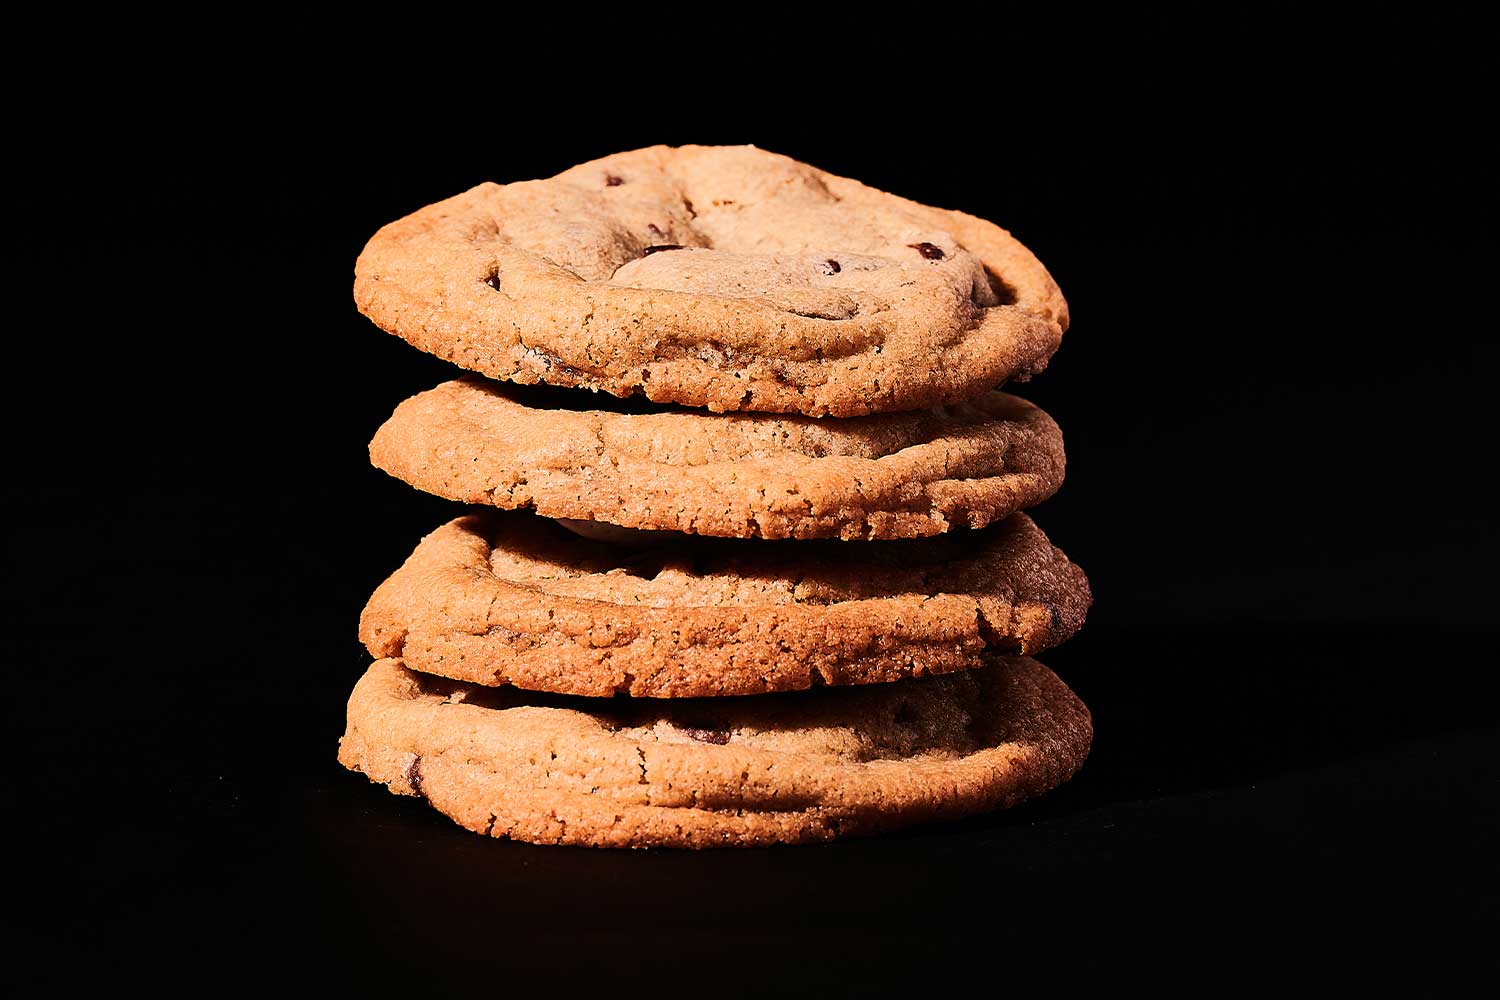 Four chocolate chip cookies stacked vertically.